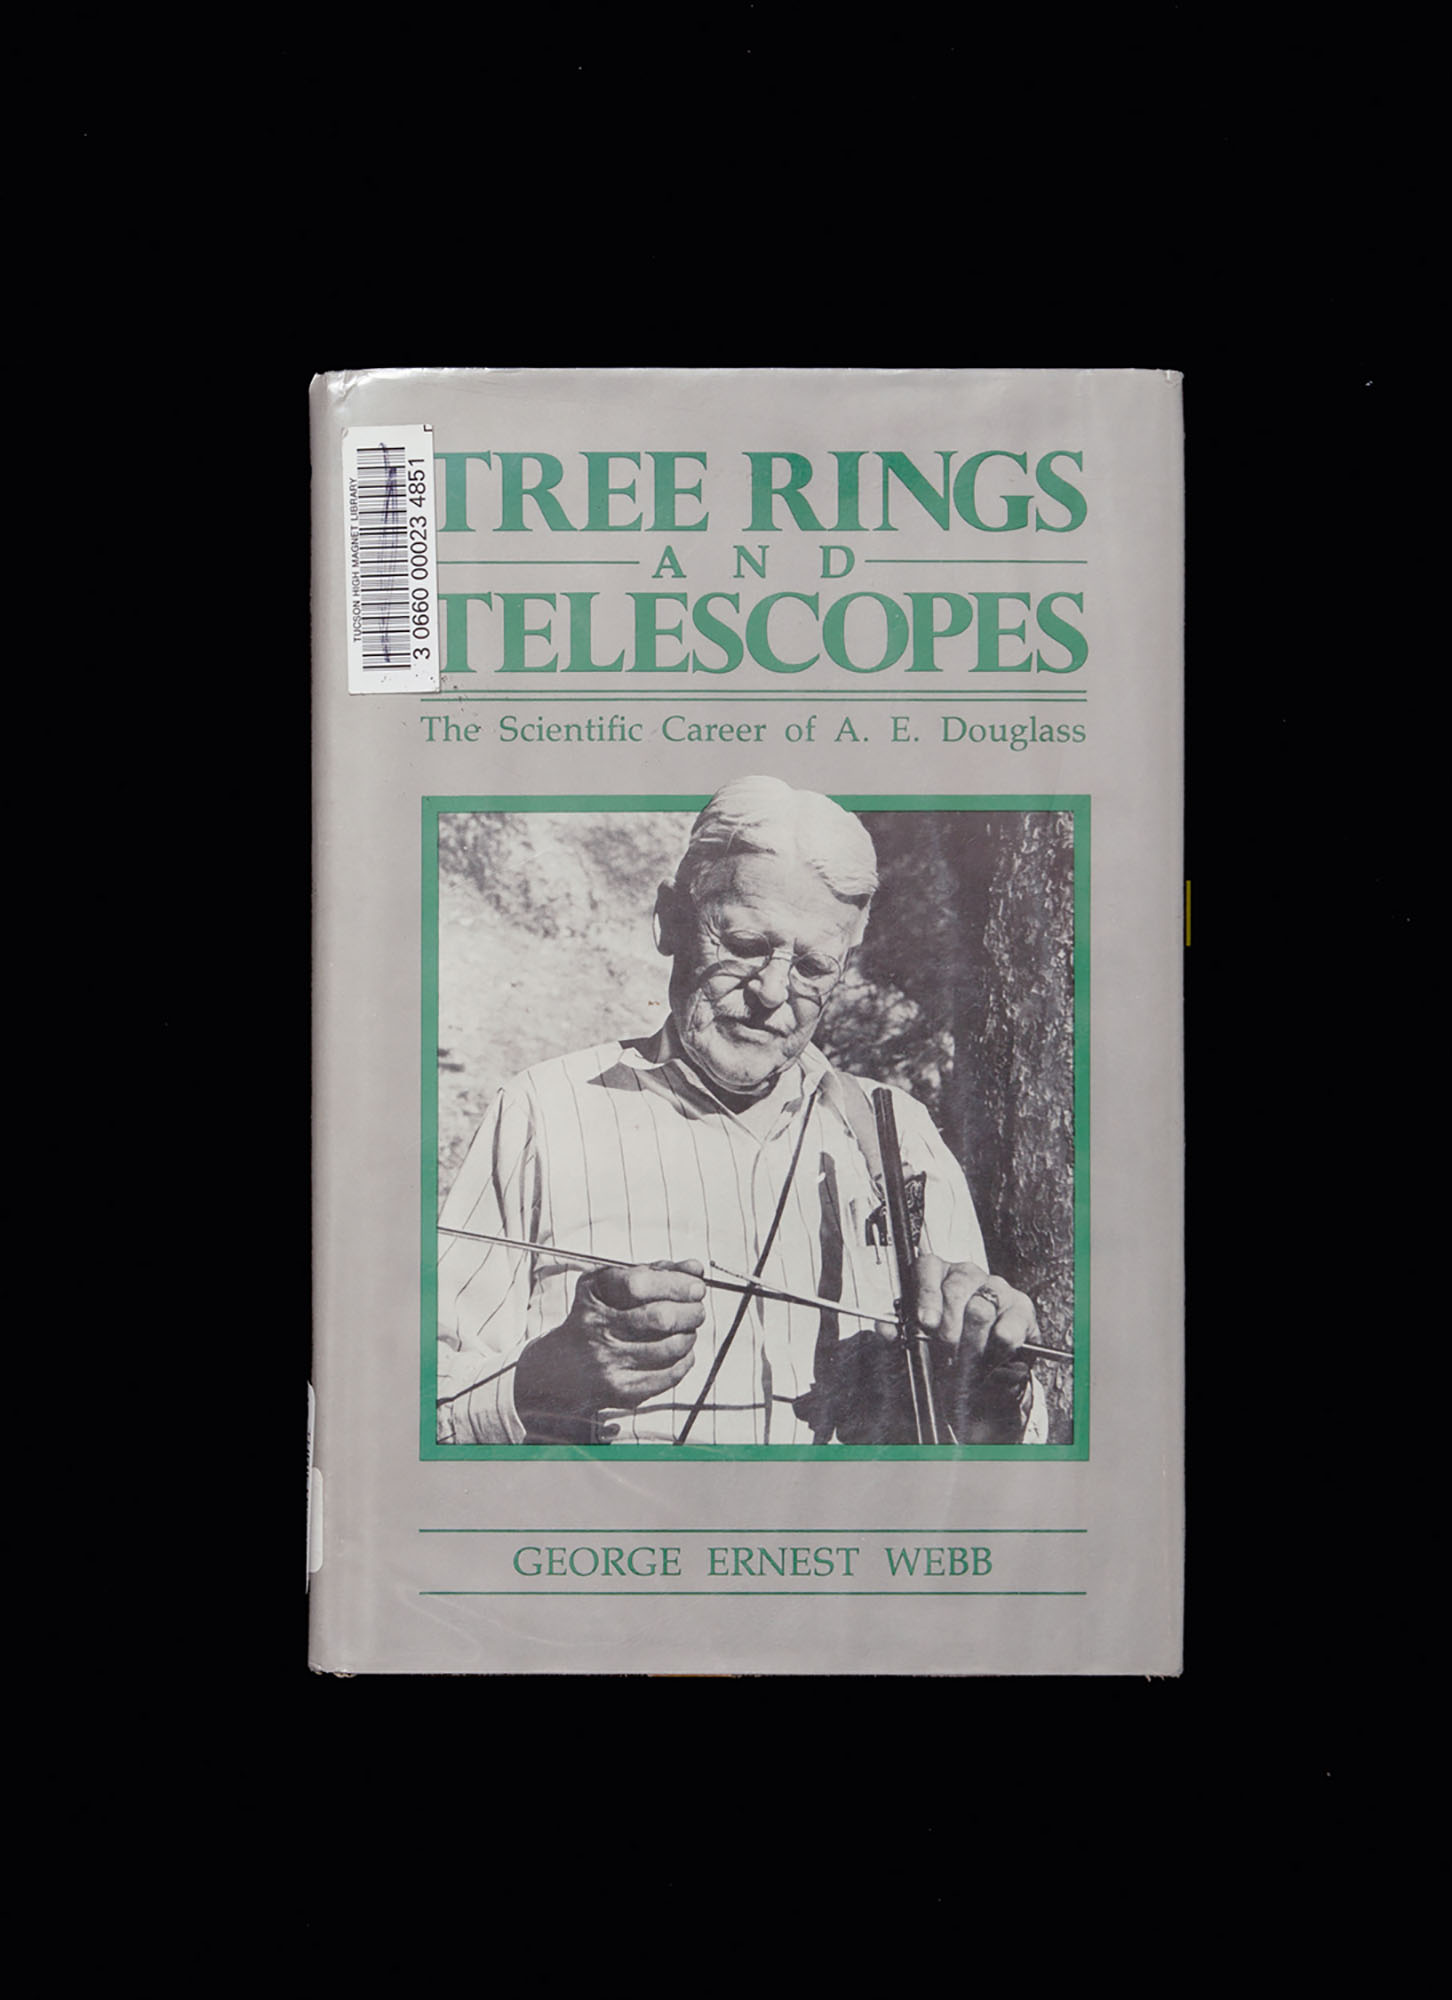 Front cover of George Ernst Webb, *Tree Rings and Telescopes: The Scientific Career of A.E. Douglass* (Tucson, Arizona: The University of Arizona Press, 1983). Reproduction photographer: Andrew Curtis.